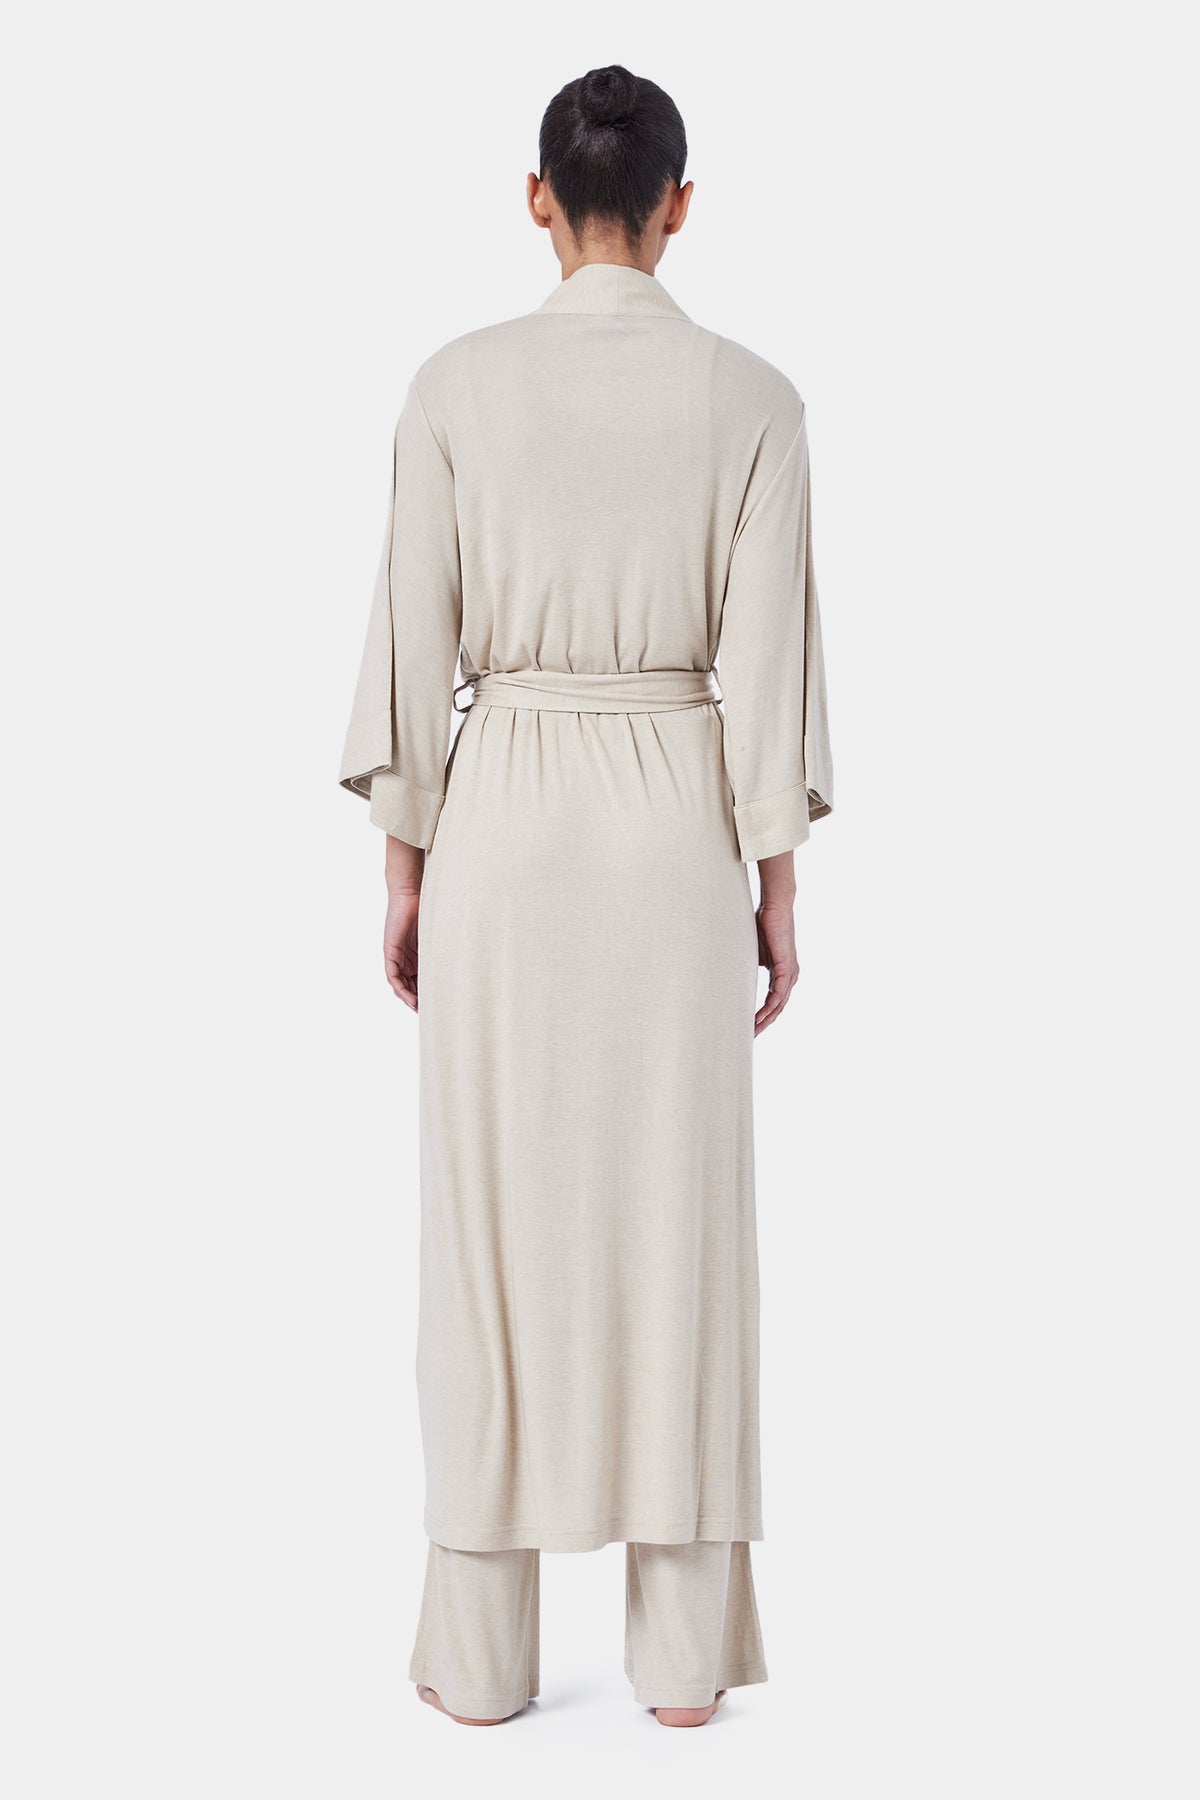 The Delilah Robe By GINIA In Oat